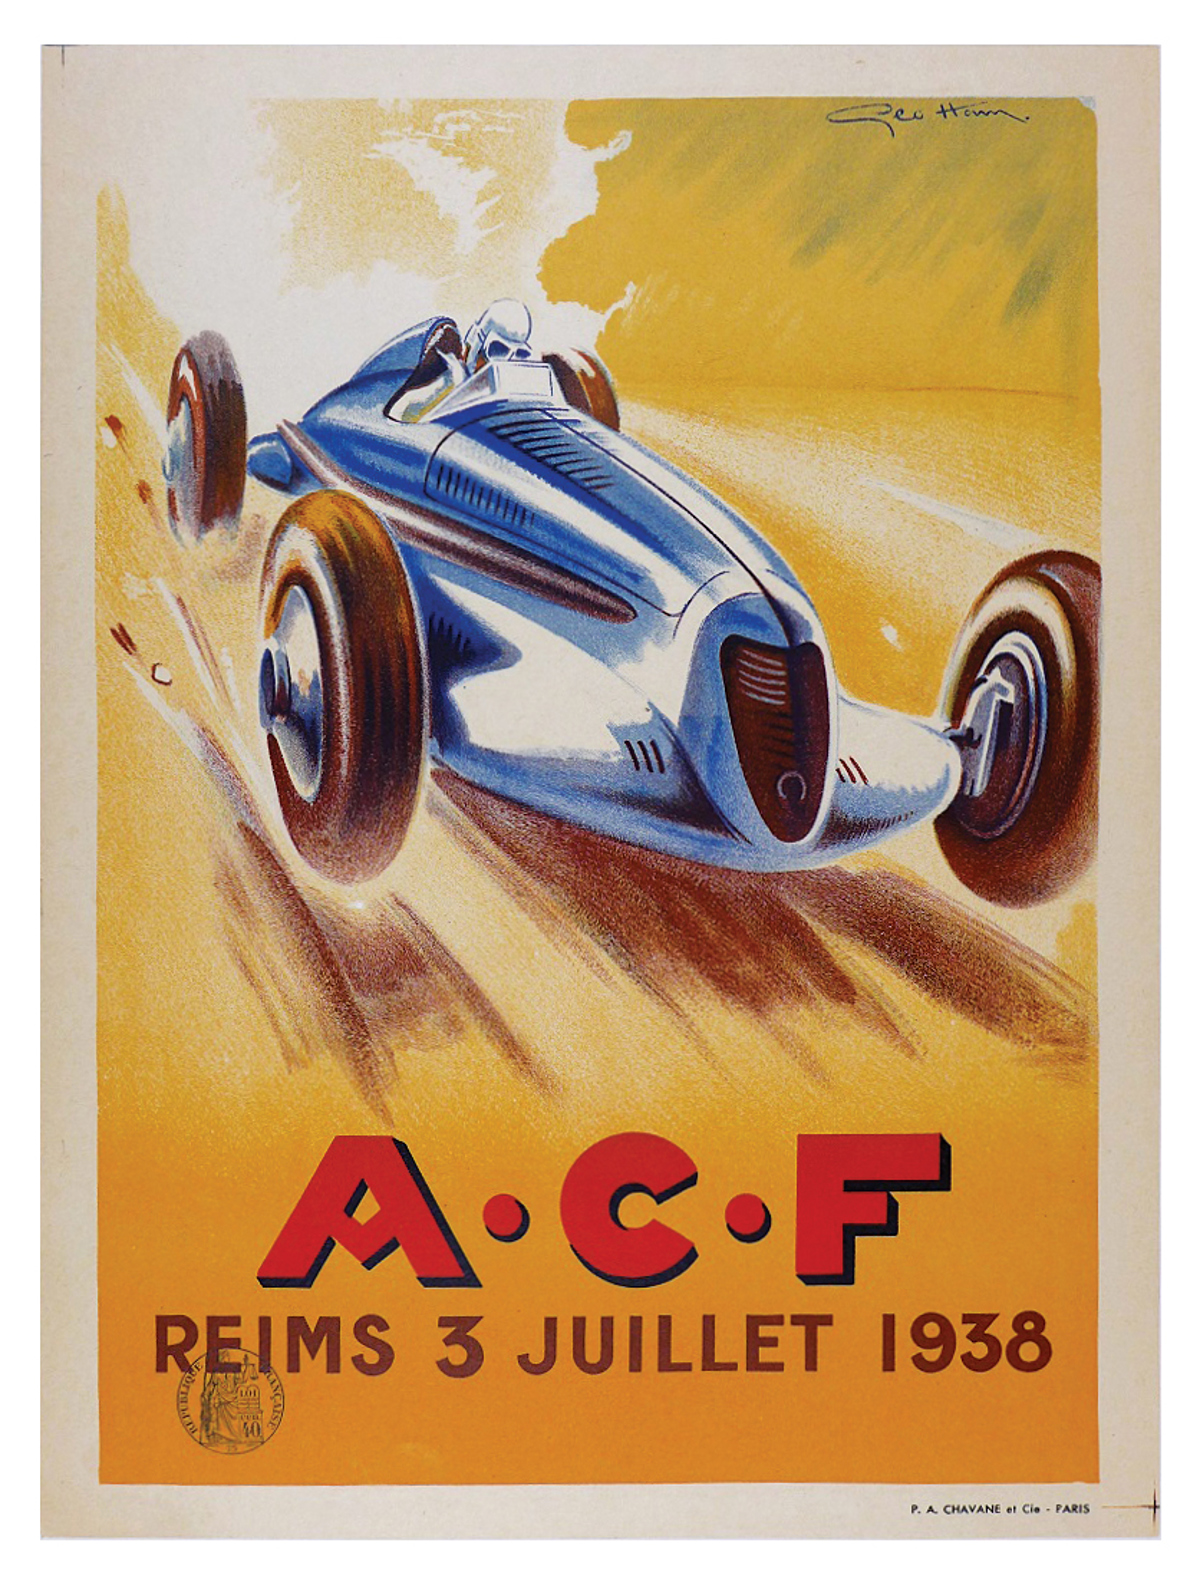 A.C.F. Reims 1938 offered in RM Sotheby’s Original Racing Posters online auction